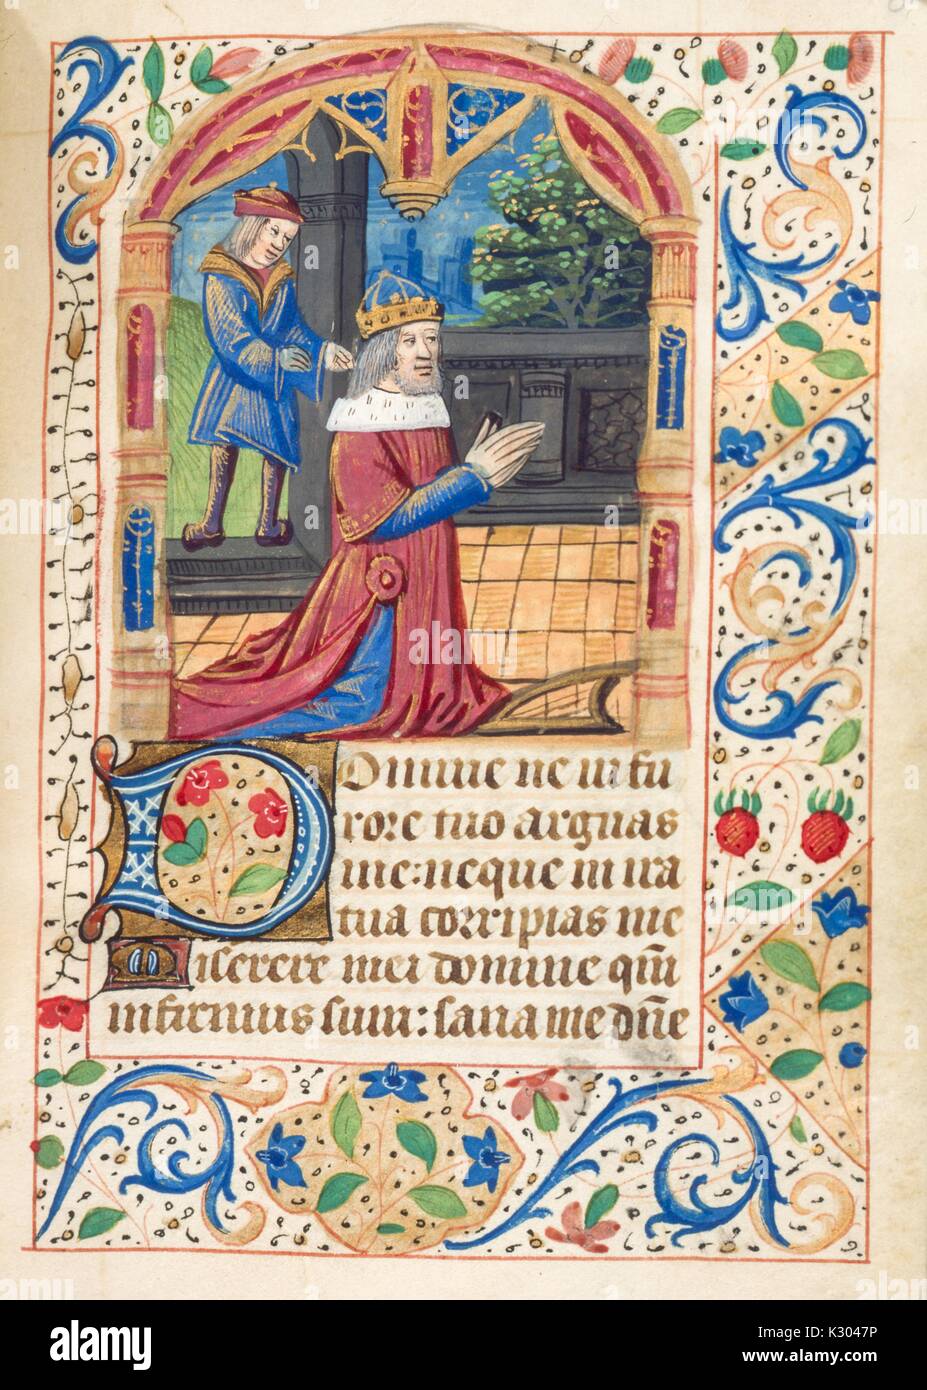 Illuminated manuscript page depicting a king praying on his knees, from the 'Initium sancti euangelii secundum iohannem, gloria tibi domine, ' a 15th century Latin book of hours, 2013. Stock Photo